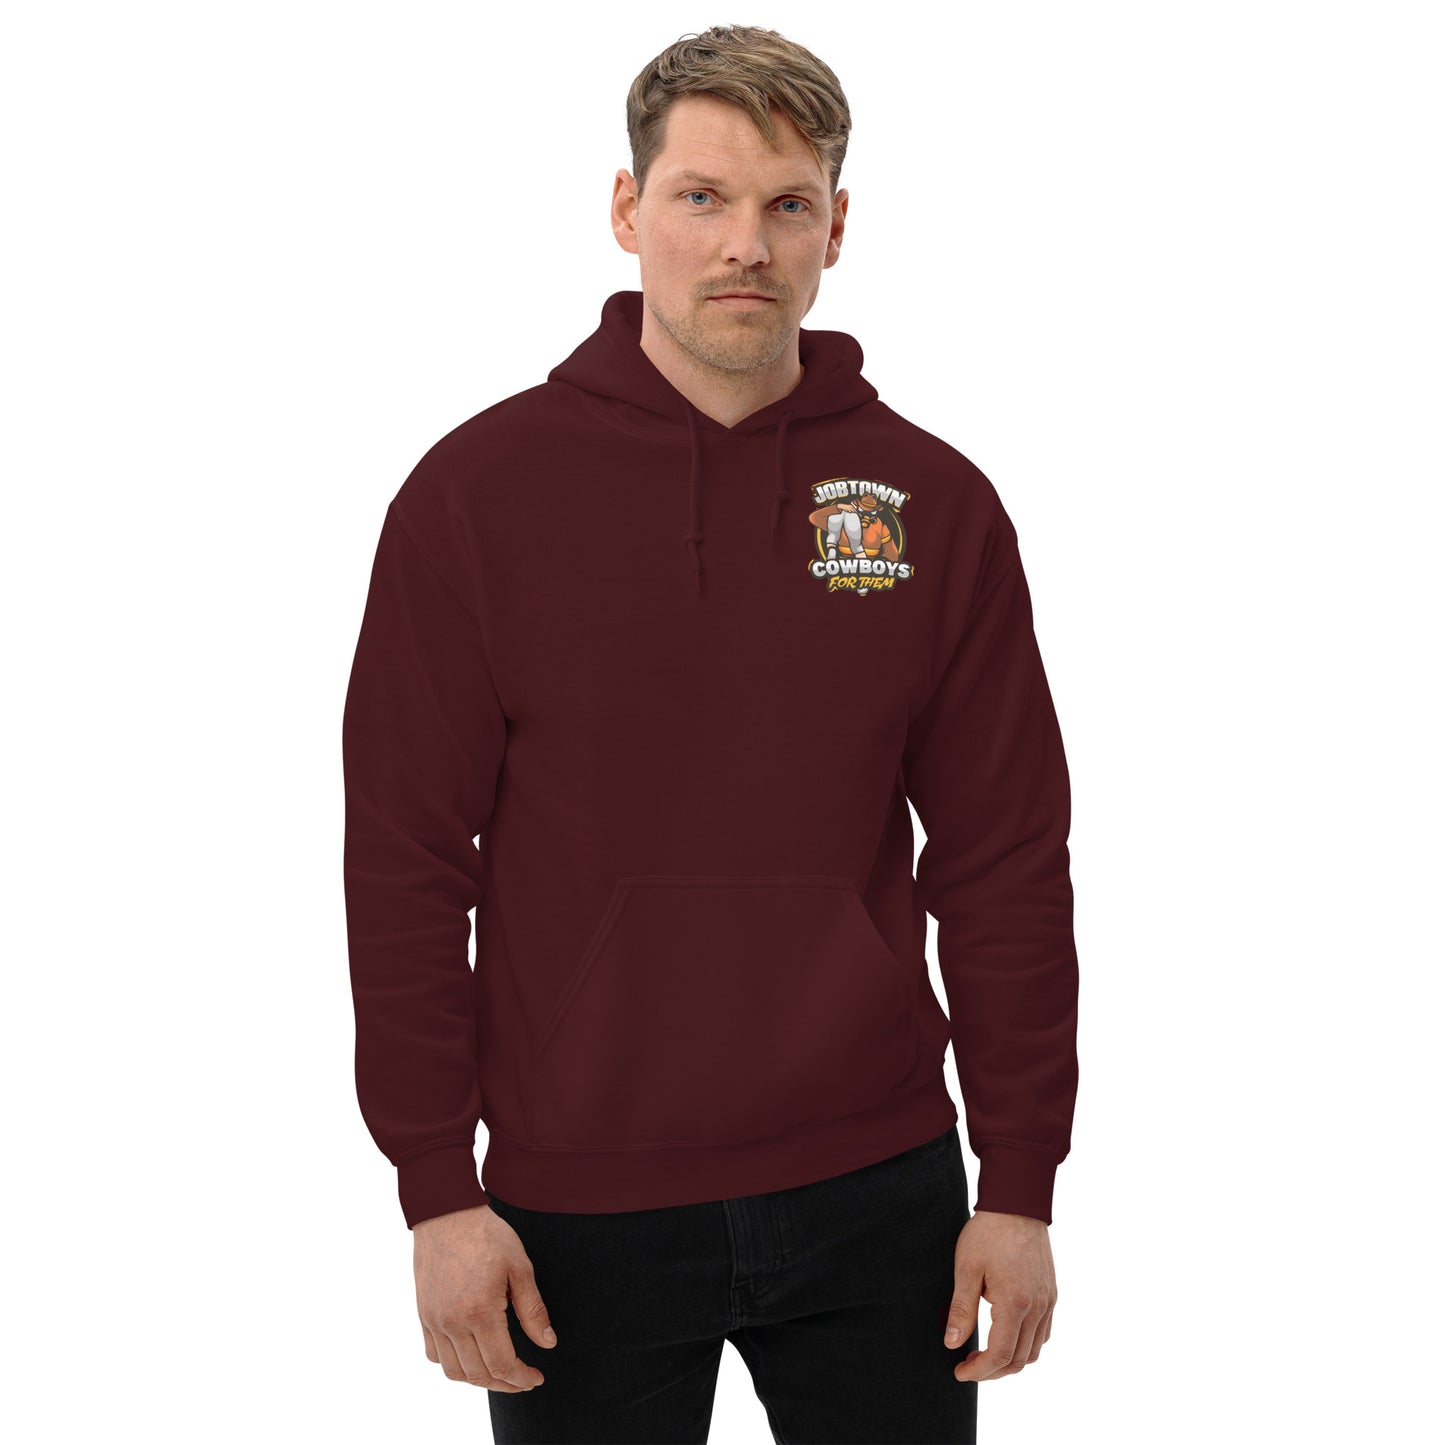 Jobtown Cowboys Firefighter - For Them Unisex Hoodie